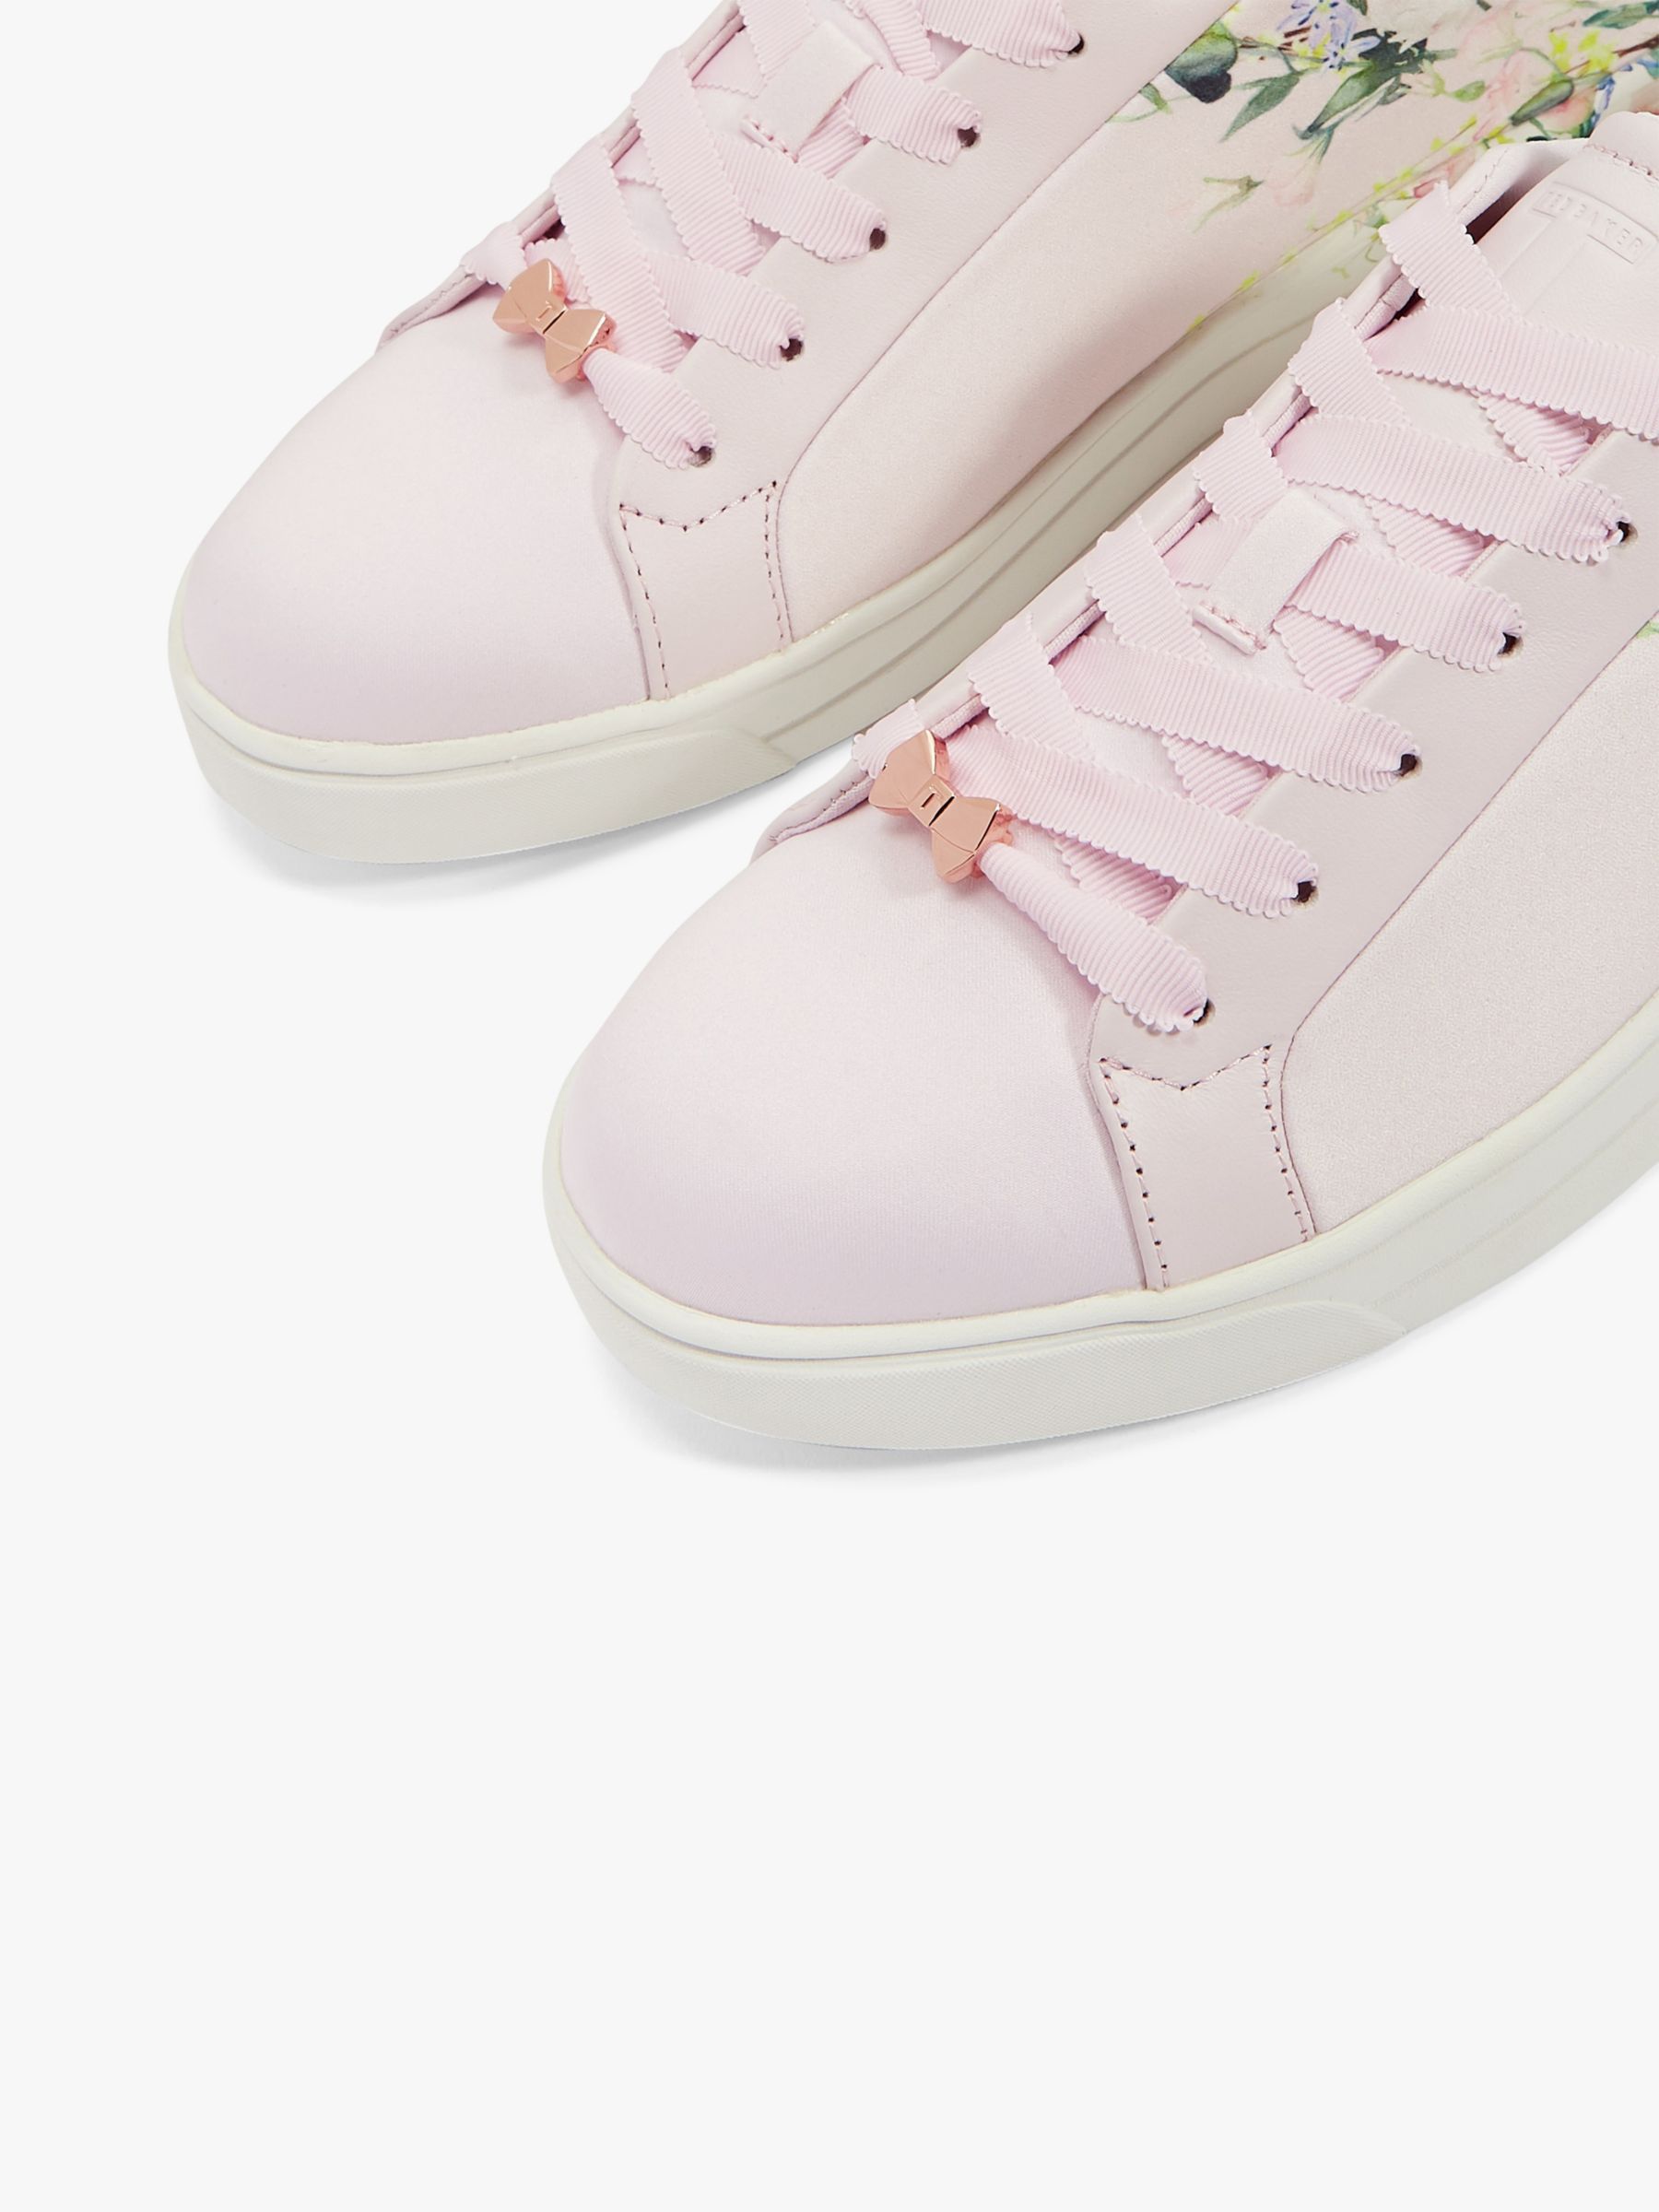 ted baker tennis shoes